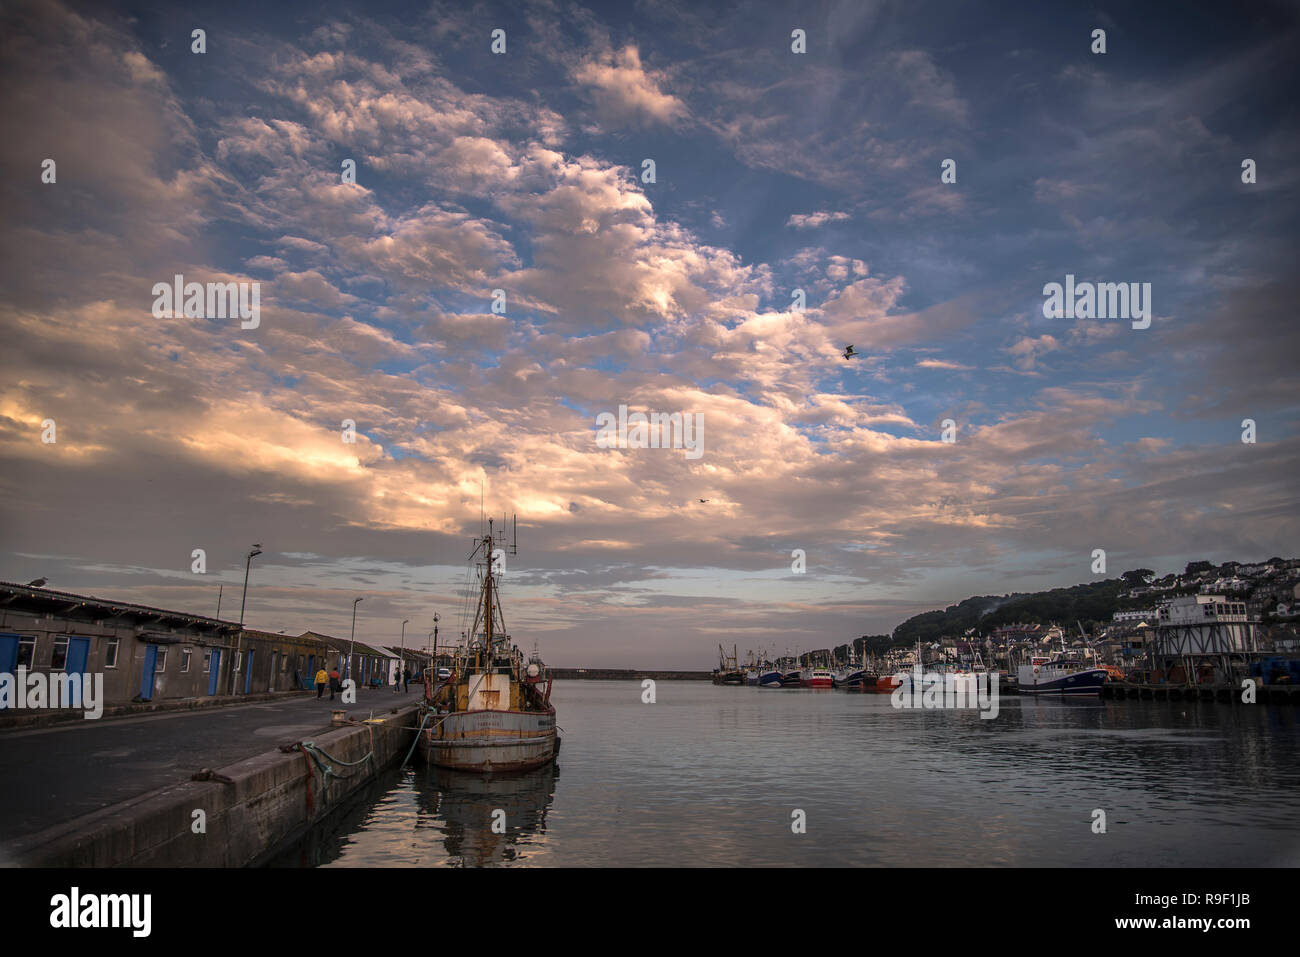 Dramatic clouds over fishing fleet Newlyn harbour Cornwall UK Stock Photo